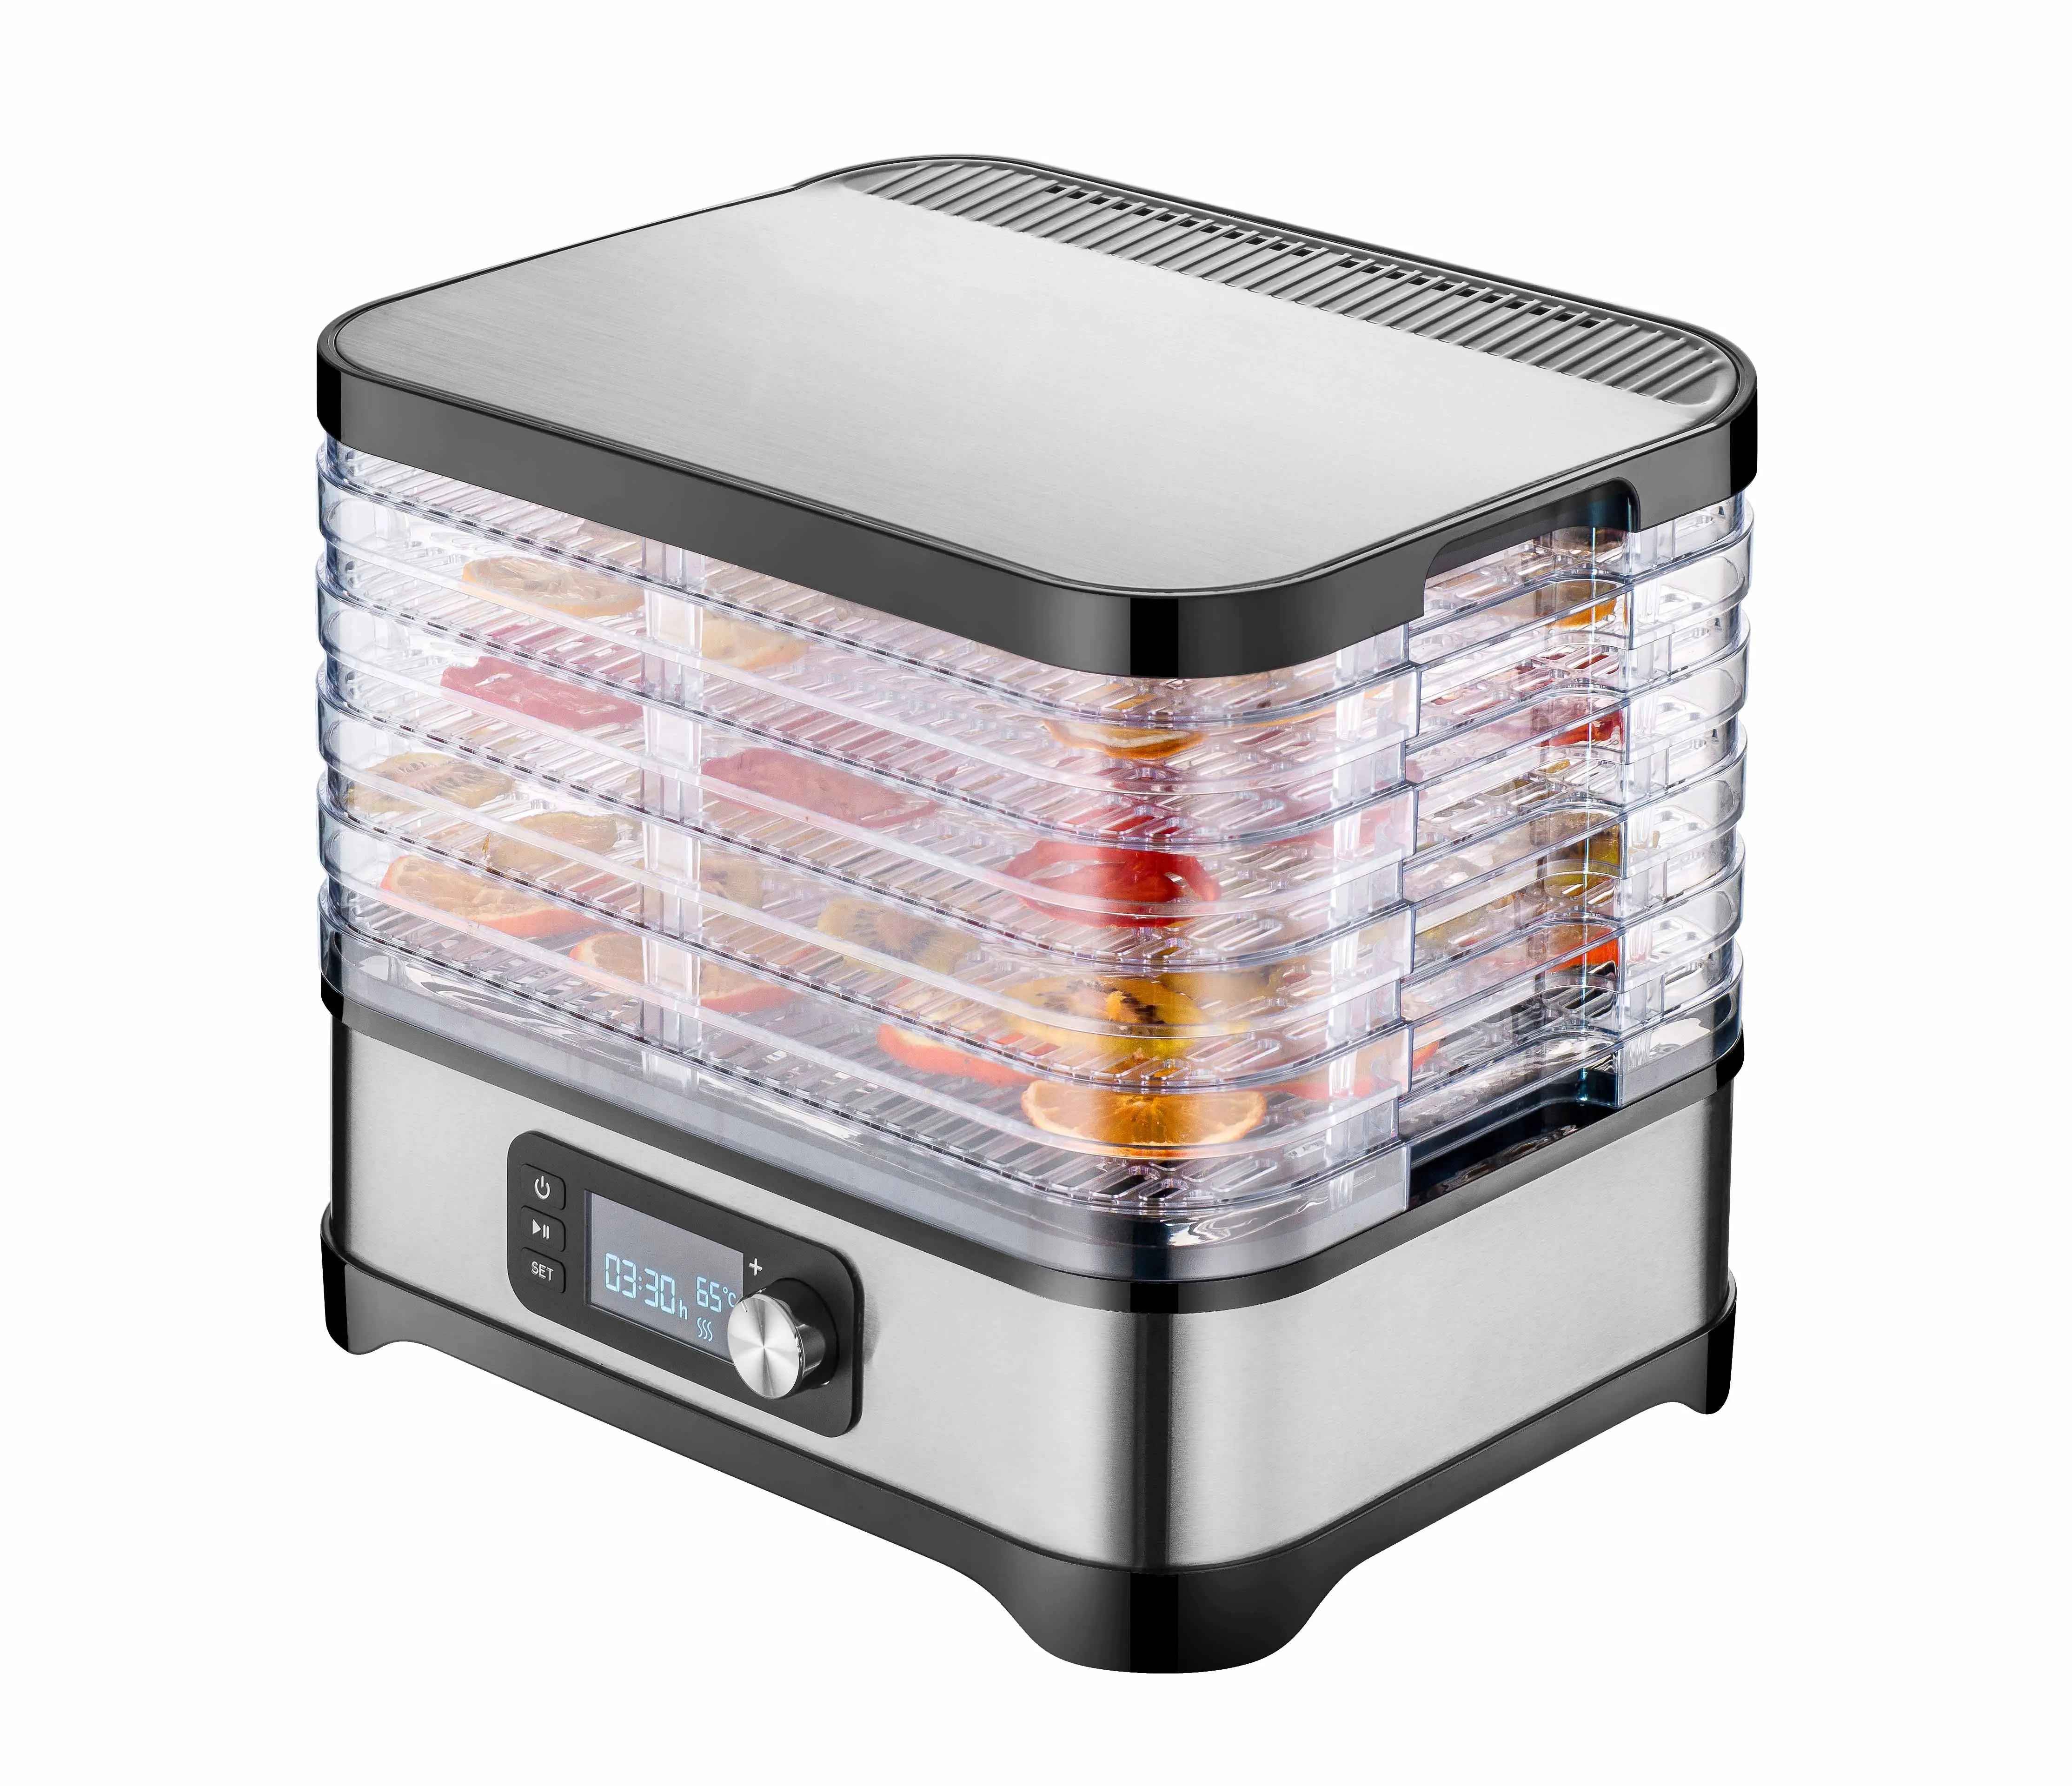 Elektrische LED mini 5 Trays Roestvrij staal thuis <span class=keywords><strong>dehydrator</strong></span> <span class=keywords><strong>voedsel</strong></span> droger <span class=keywords><strong>voedsel</strong></span> processor